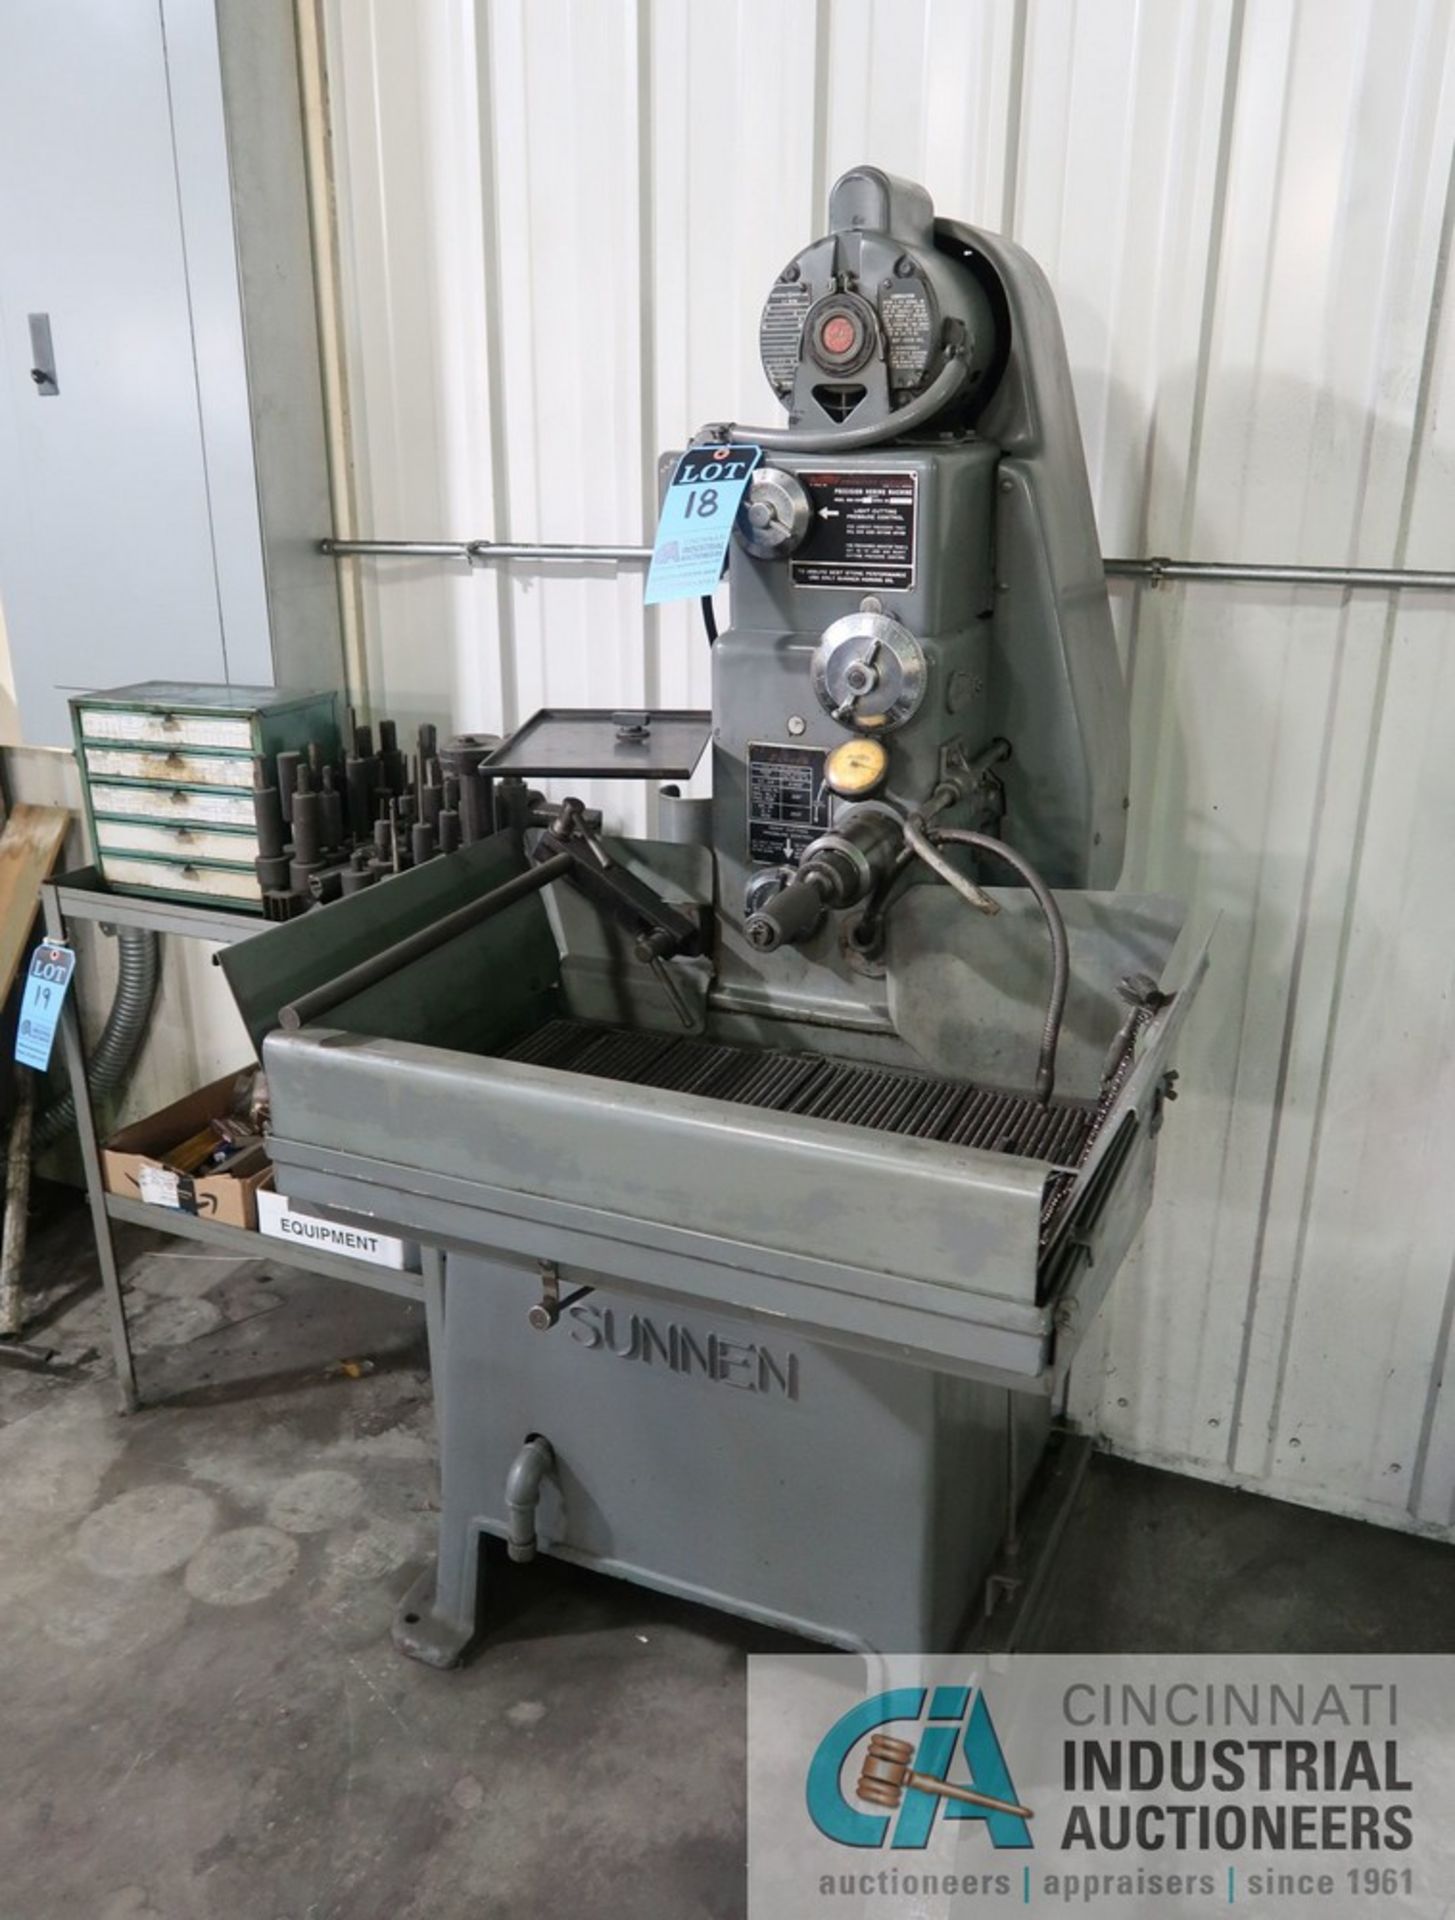 SUNNEN MODEL MBB-1600 PRECISION HONING MACHINE S/N 41516, SINGLE PHASE 115/230 VOLTS AND 1/2 H.P.